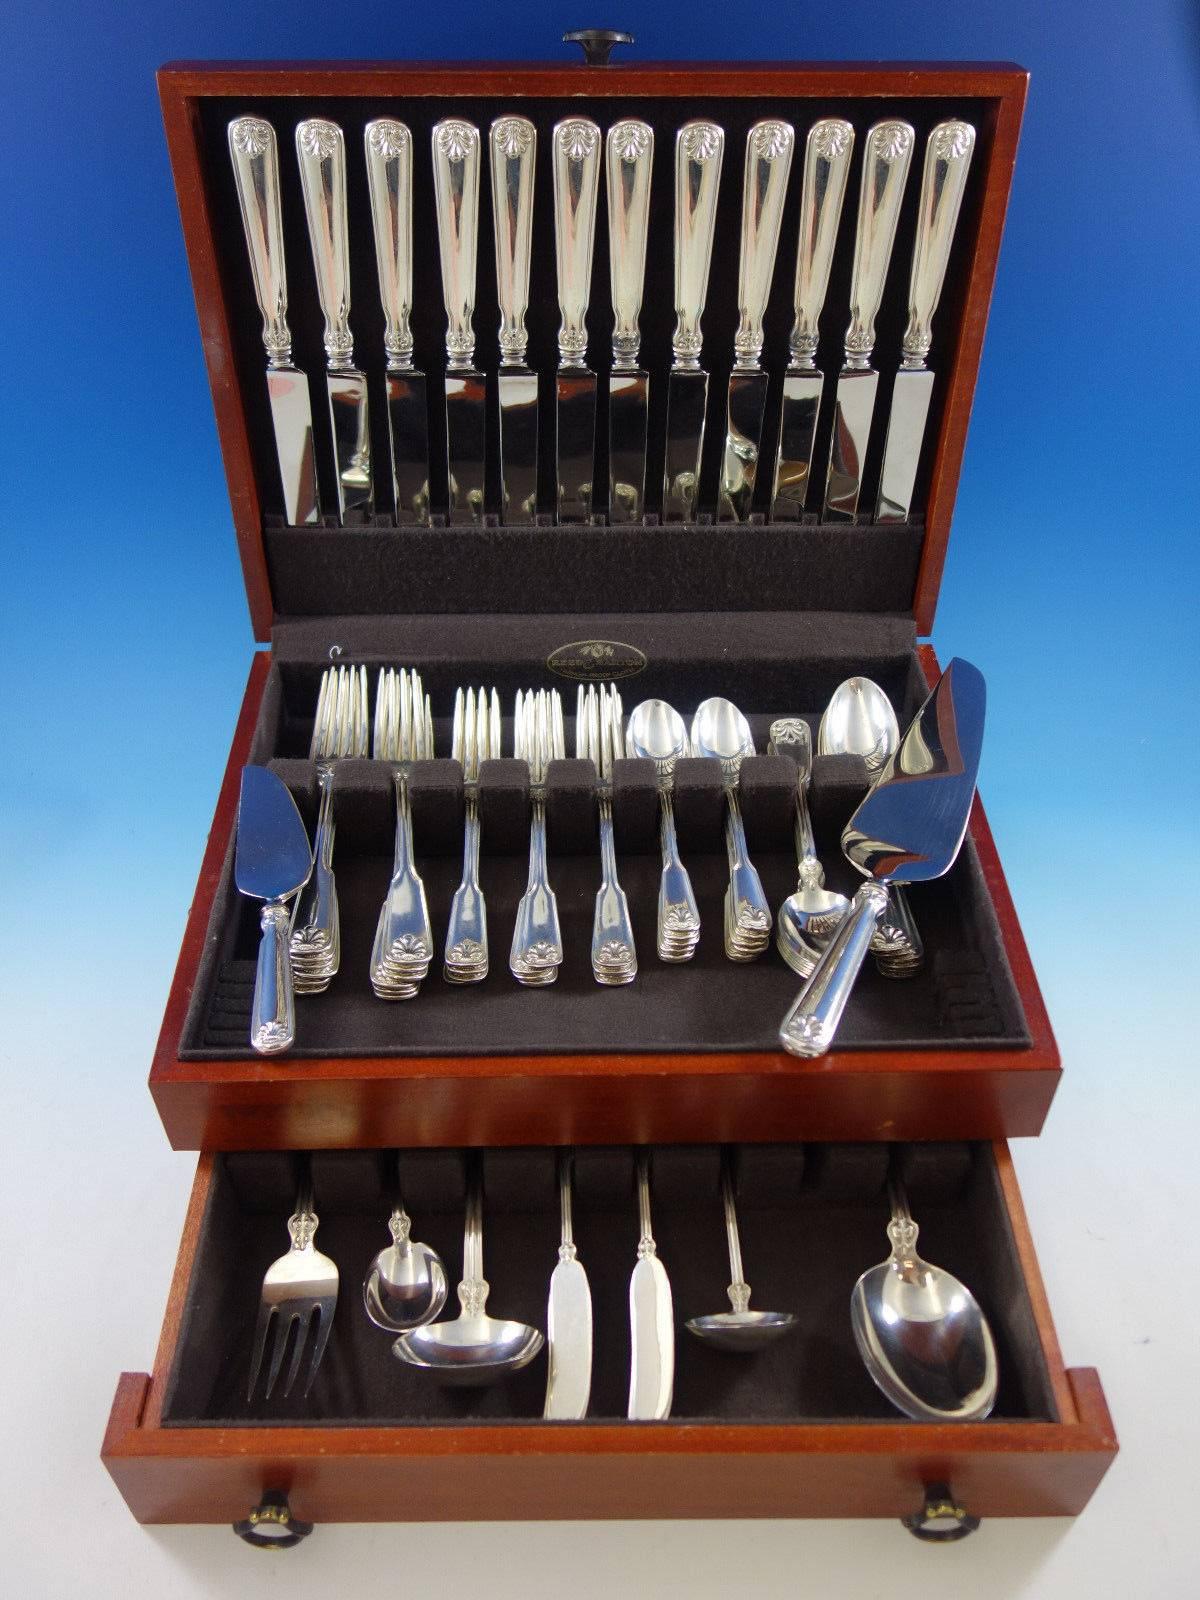 Dinner size Shell & Thread by Tiffany & Co. sterling silver flatware set, 79 pieces. This set includes: 12 dinner size knives, 10 1/4", 12 dinner size forks, 7 5/8", 12 luncheon/dessert forks, 6 5/8", 12 teaspoons, 5